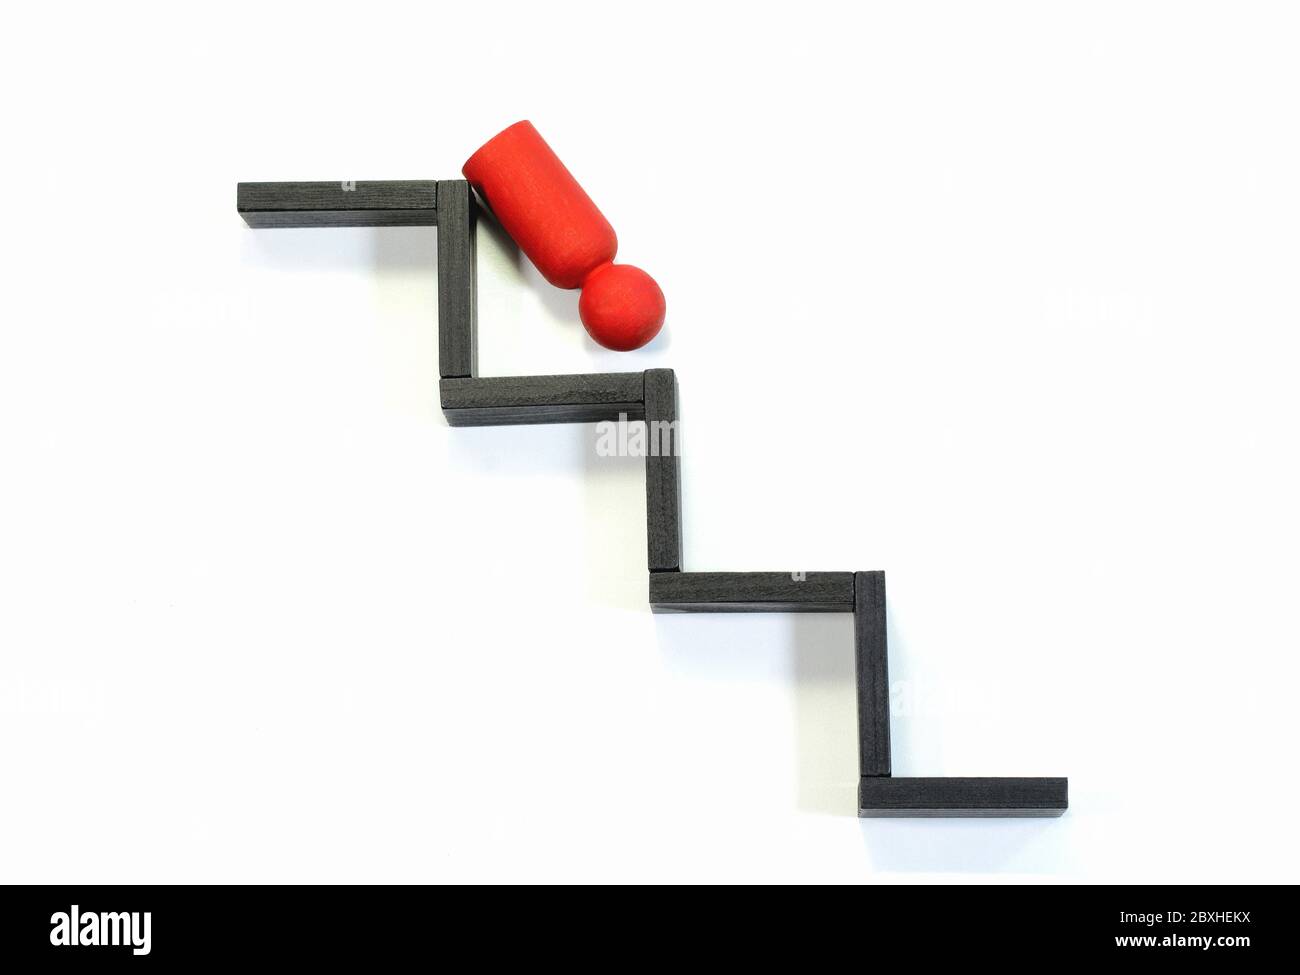 Wooden figurine falling from the steps. Concept of leadership failure. Stock Photo